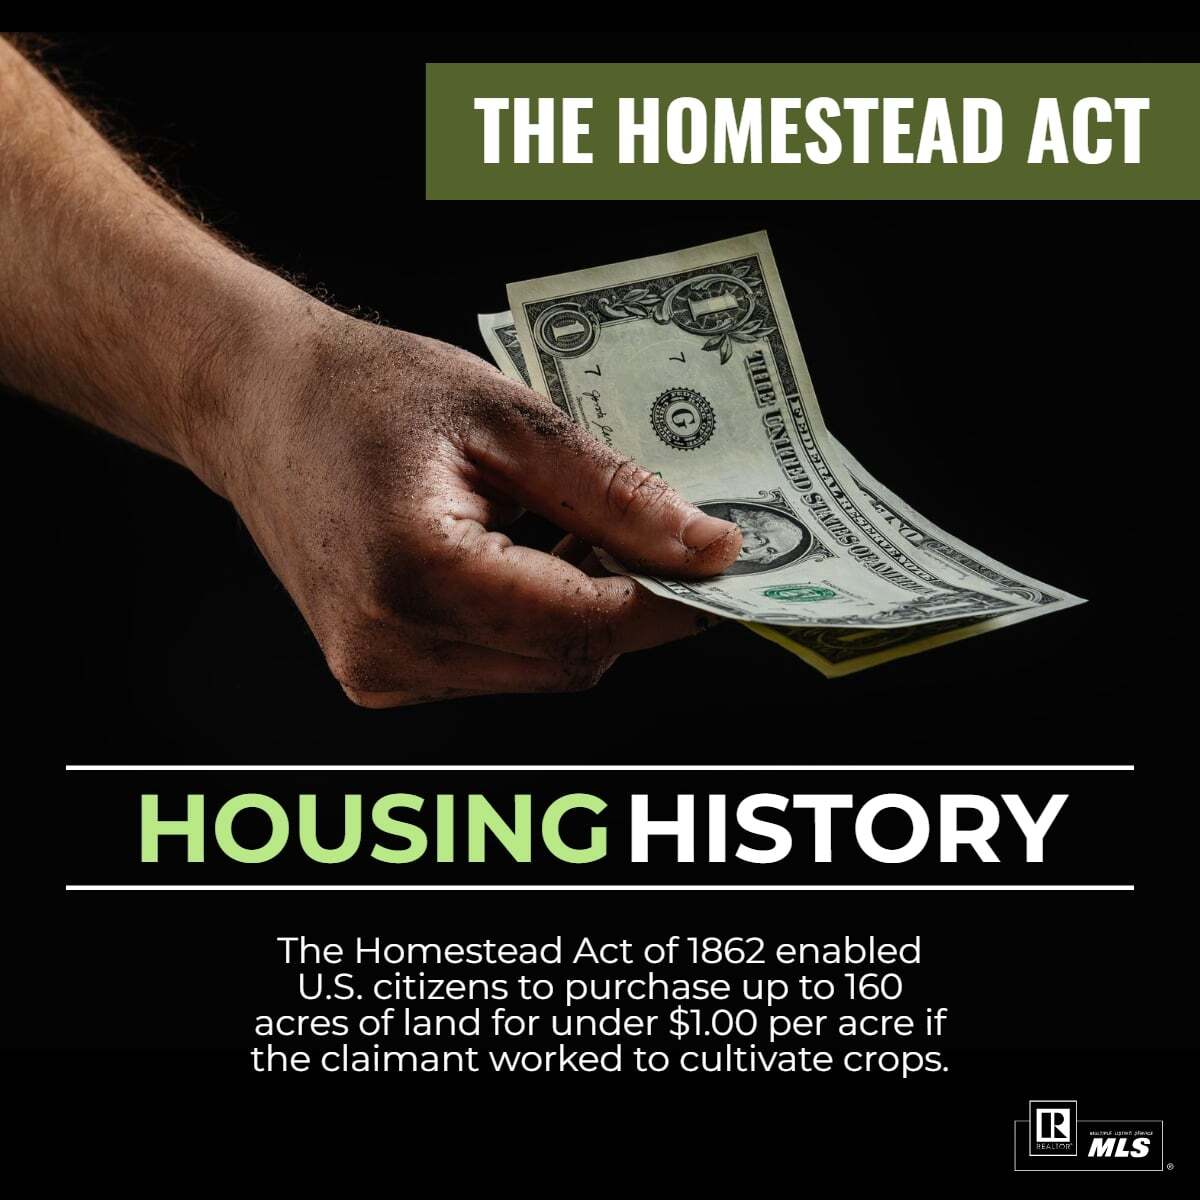 Housing History!

The 1862 Homestead Act granted 160 acres, paving the way for cultivation and home building

The Hamilton Home Group
Keller Williams Realty
Direct: 901-831-5308
Office: 901-261-7900
mykhamiltonhomes.com
  
#Housing #HomesteadAct #buy #sell #invest #TheHamilton